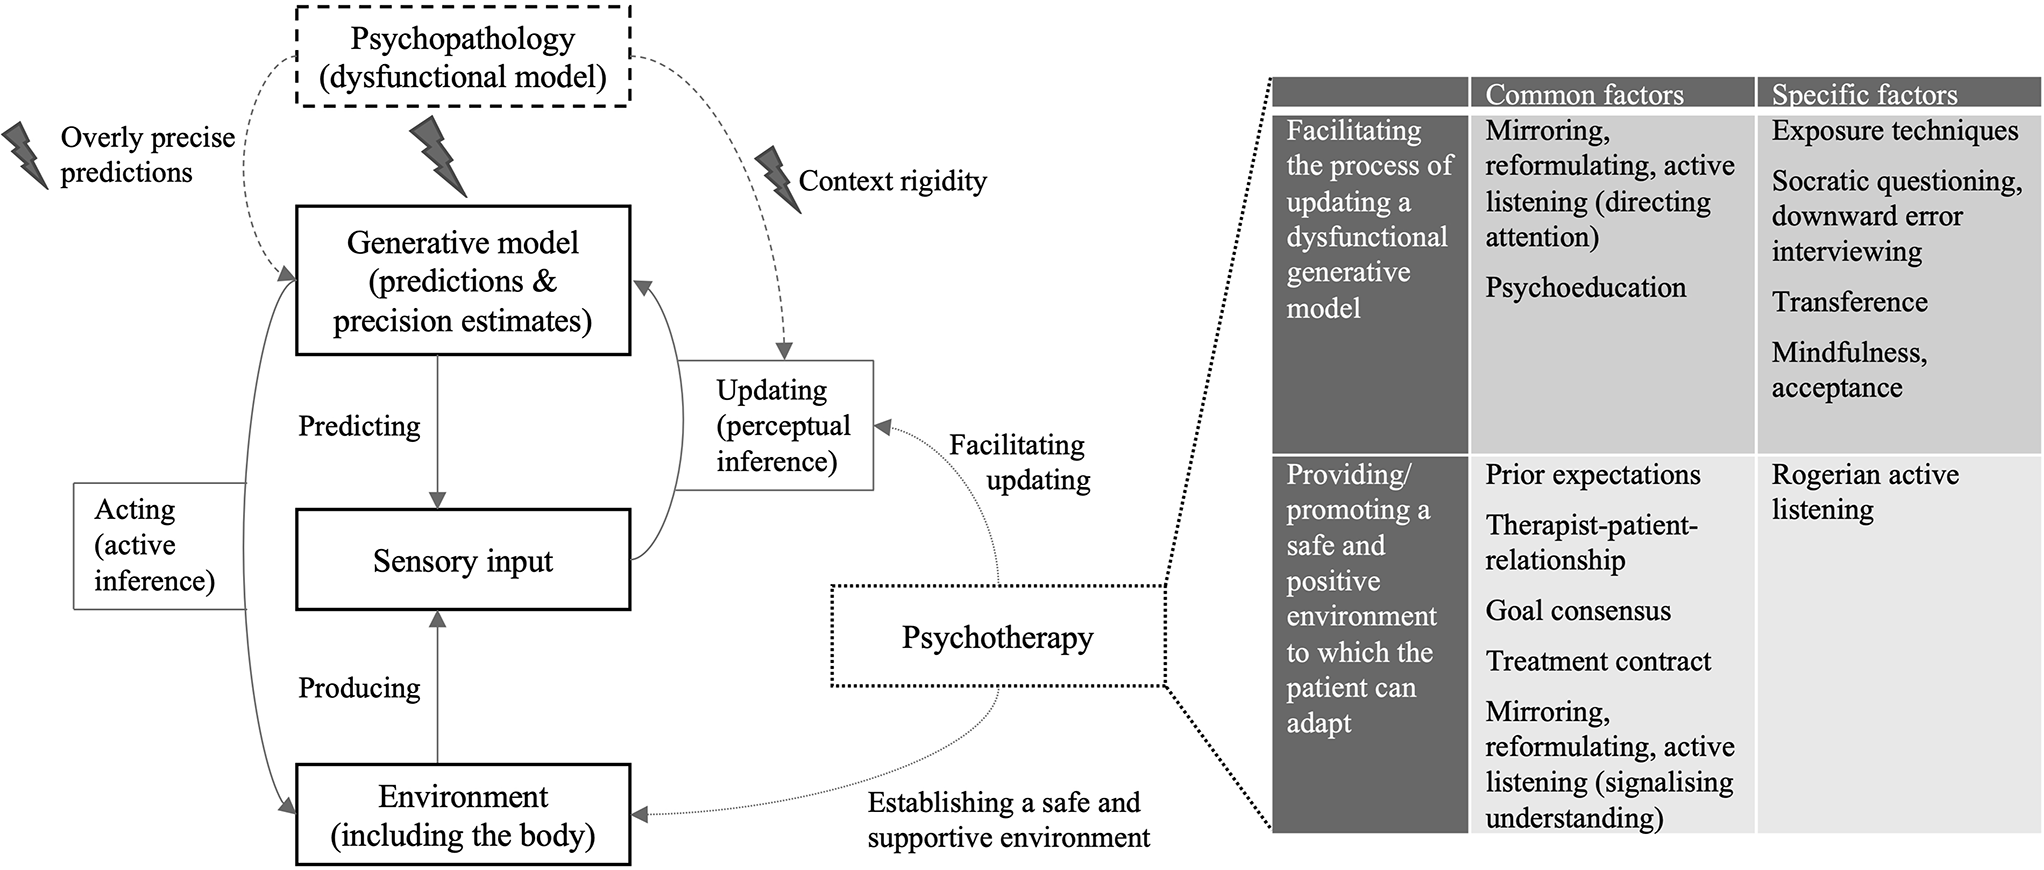 An Integrative Model of Psychotherapeutic Interventions Based on a Predictive Processing Framework